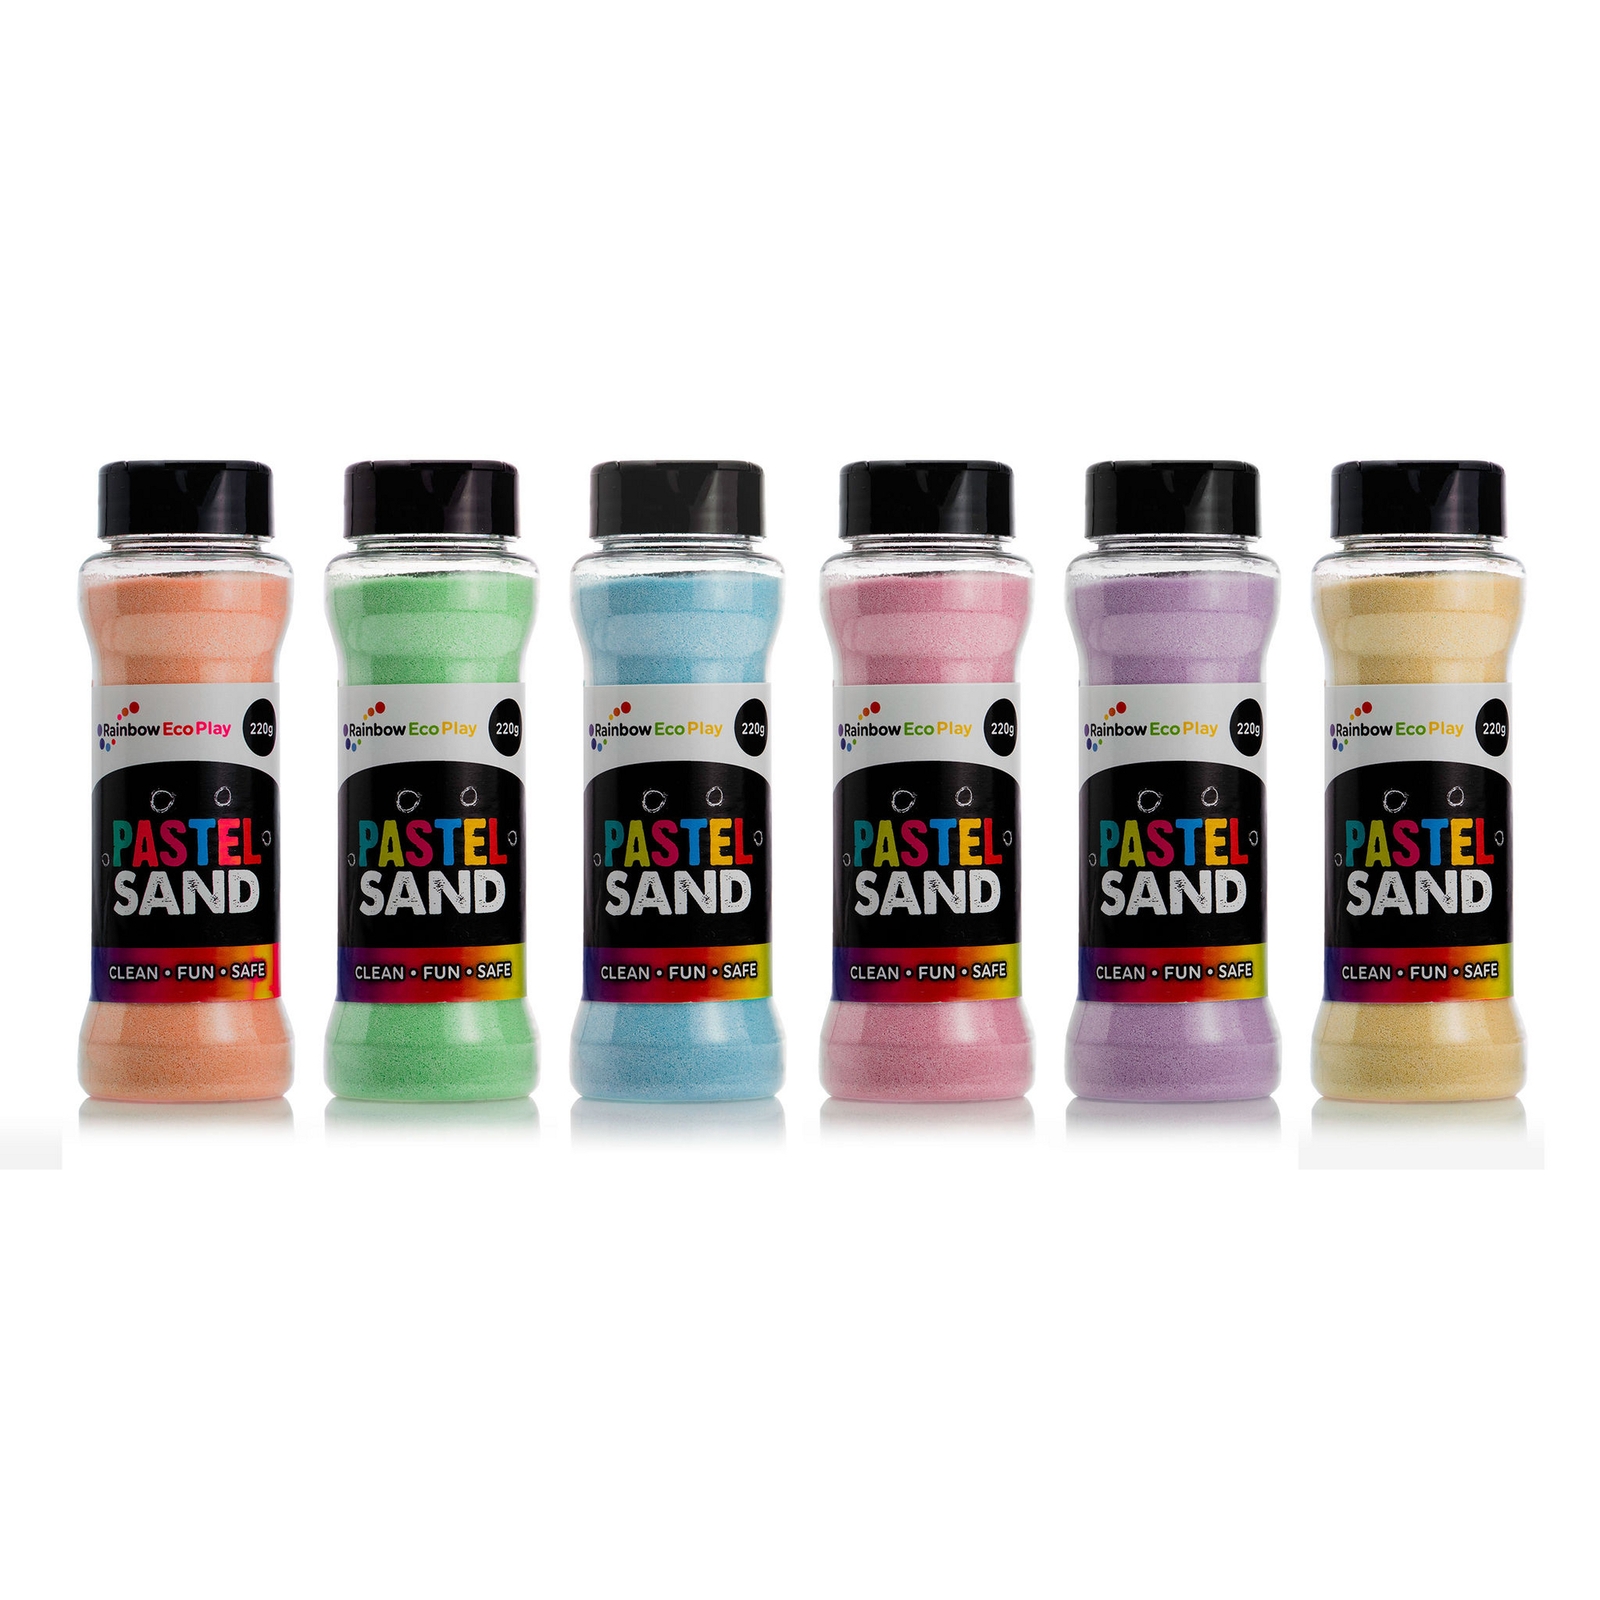 Eco-Friendly Pastel Sand - 220g Shakers